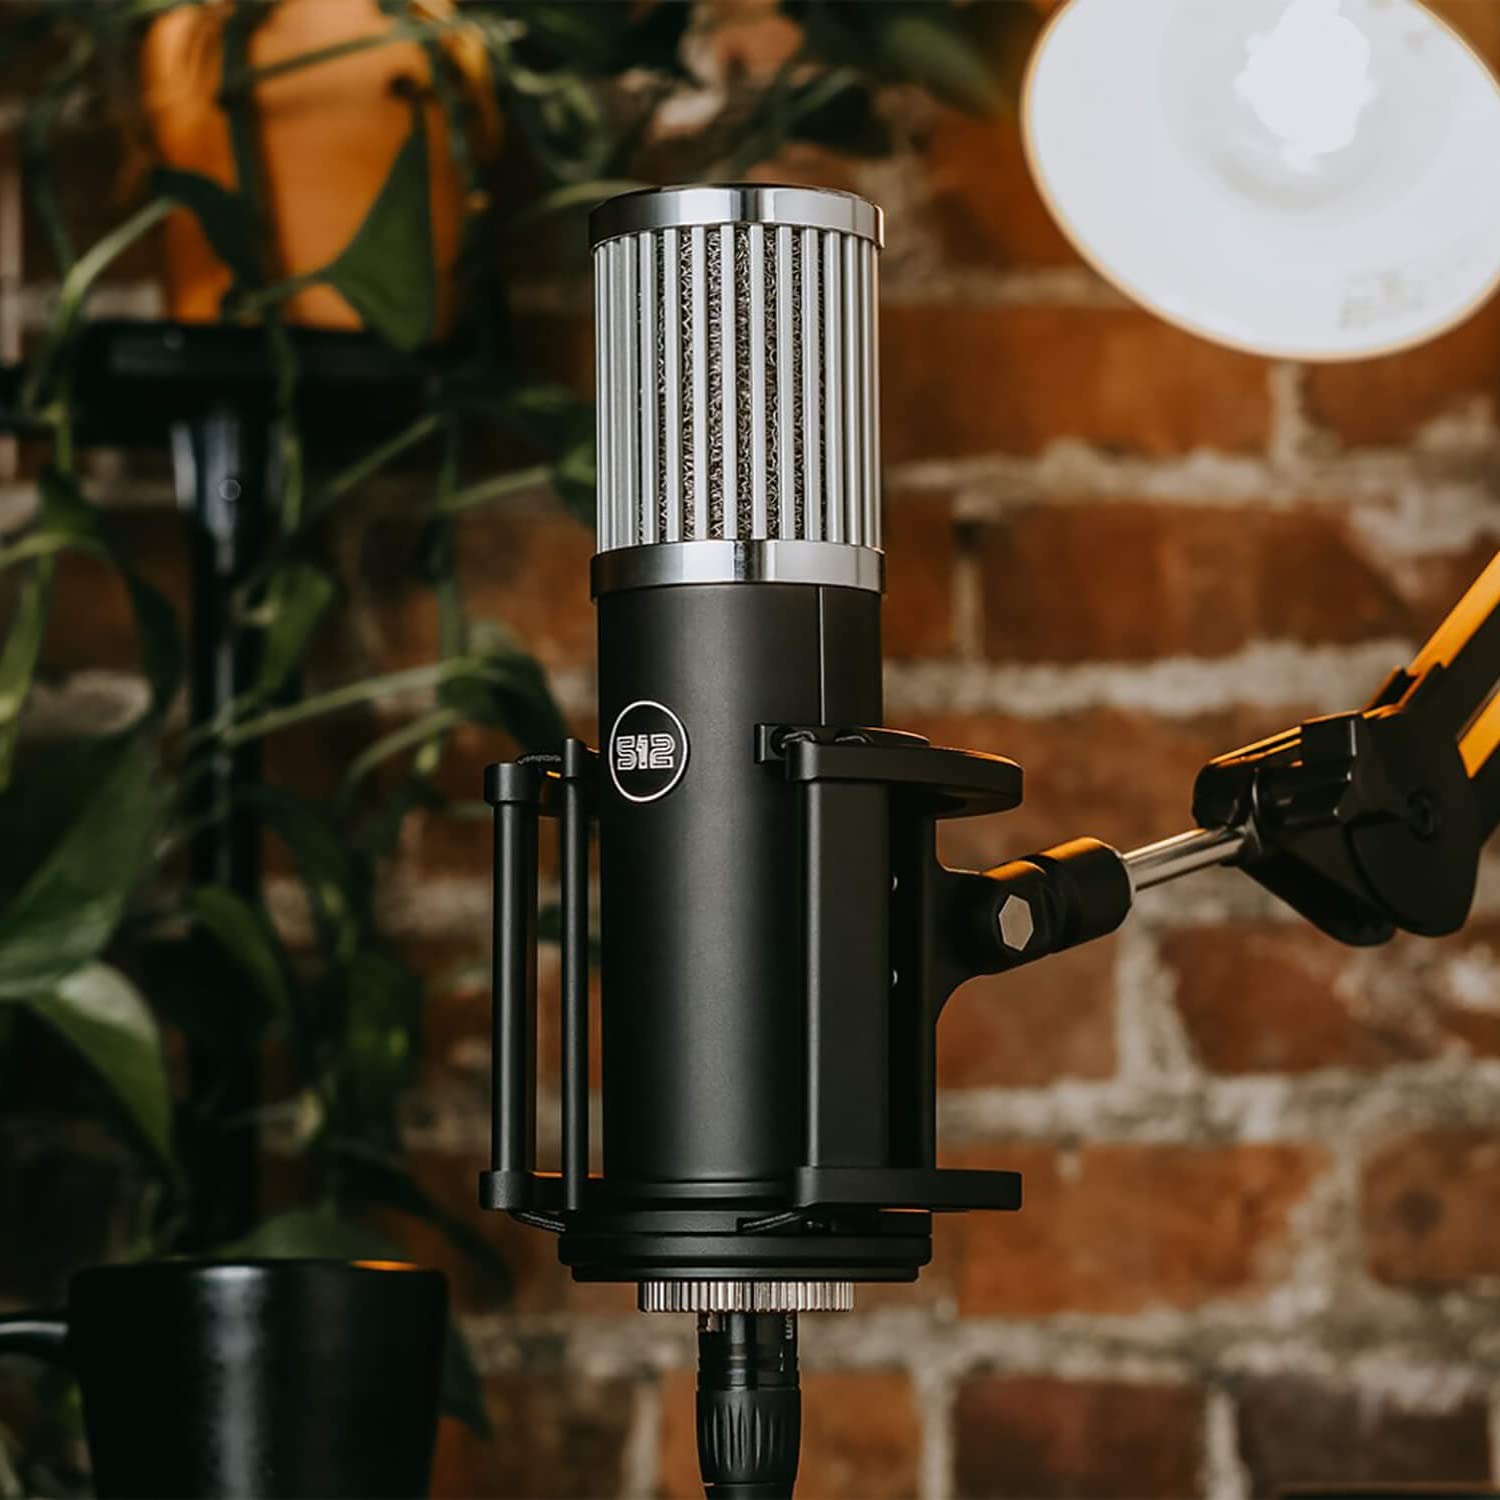 512 Audio Skylight Large Diaphragm Condenser XLR Microphone for Podcasts, Streaming and Vocal Recordings